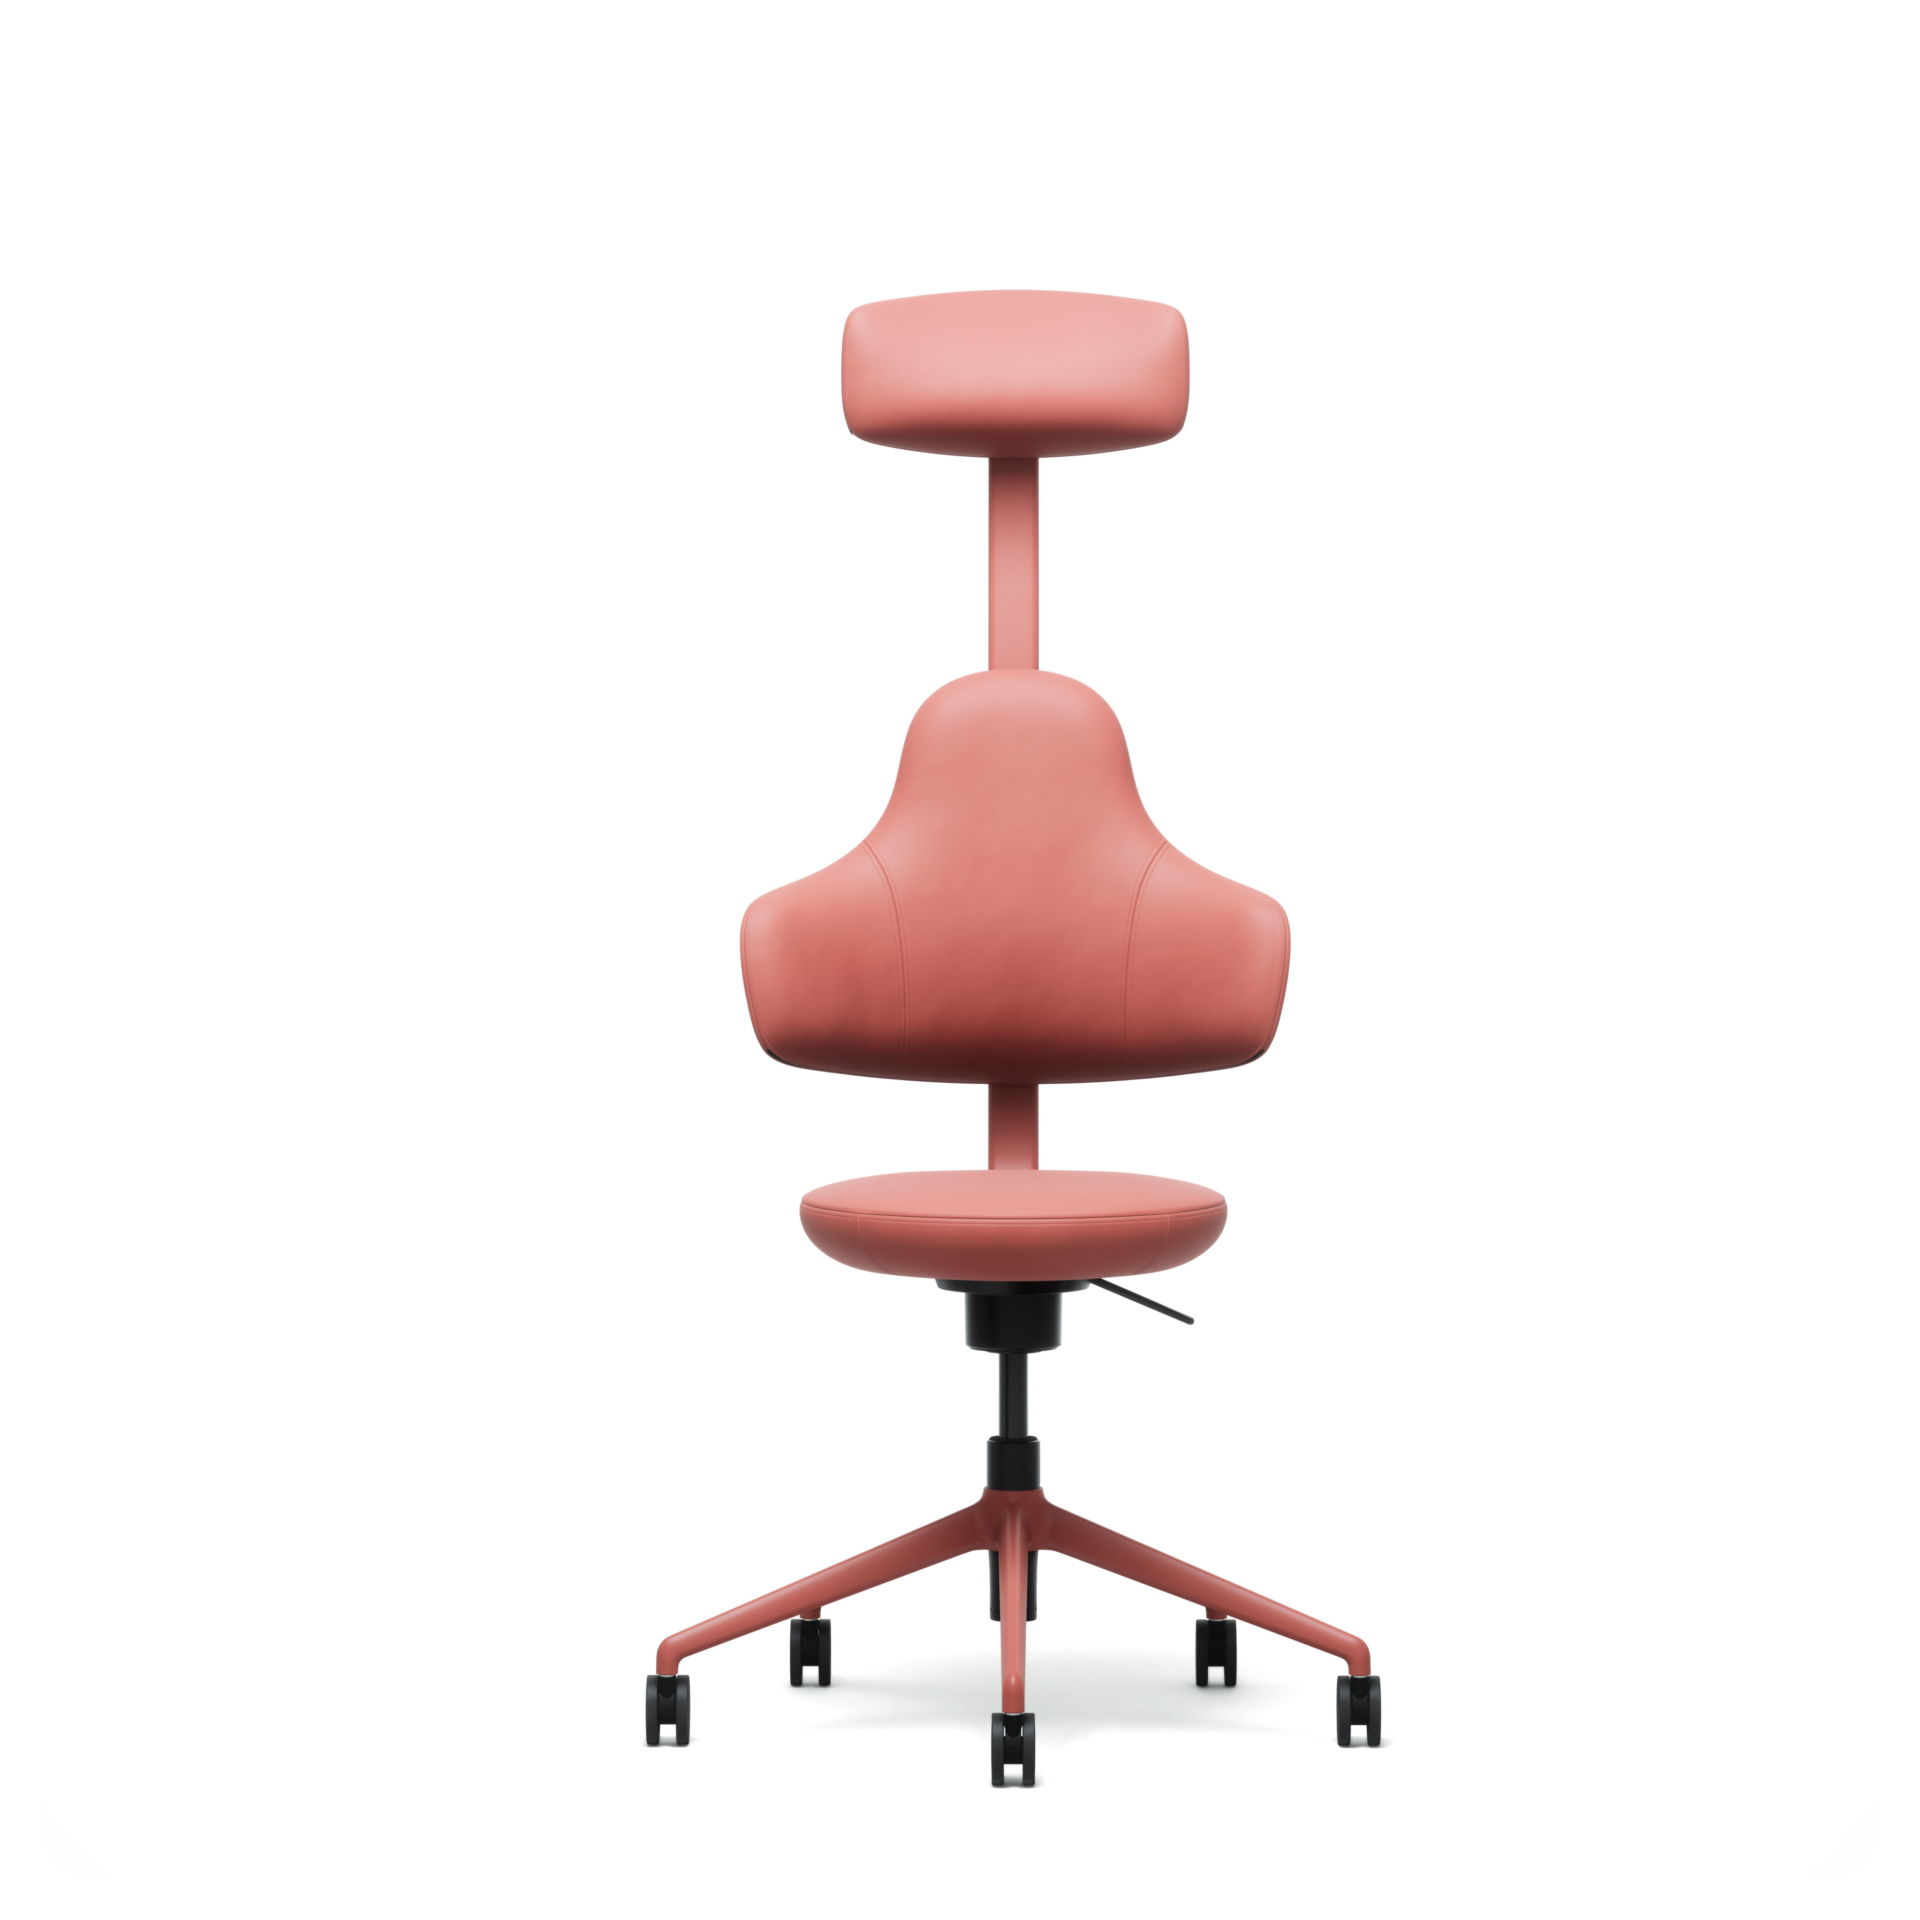 Spine Spine workchair thumbnail image 15